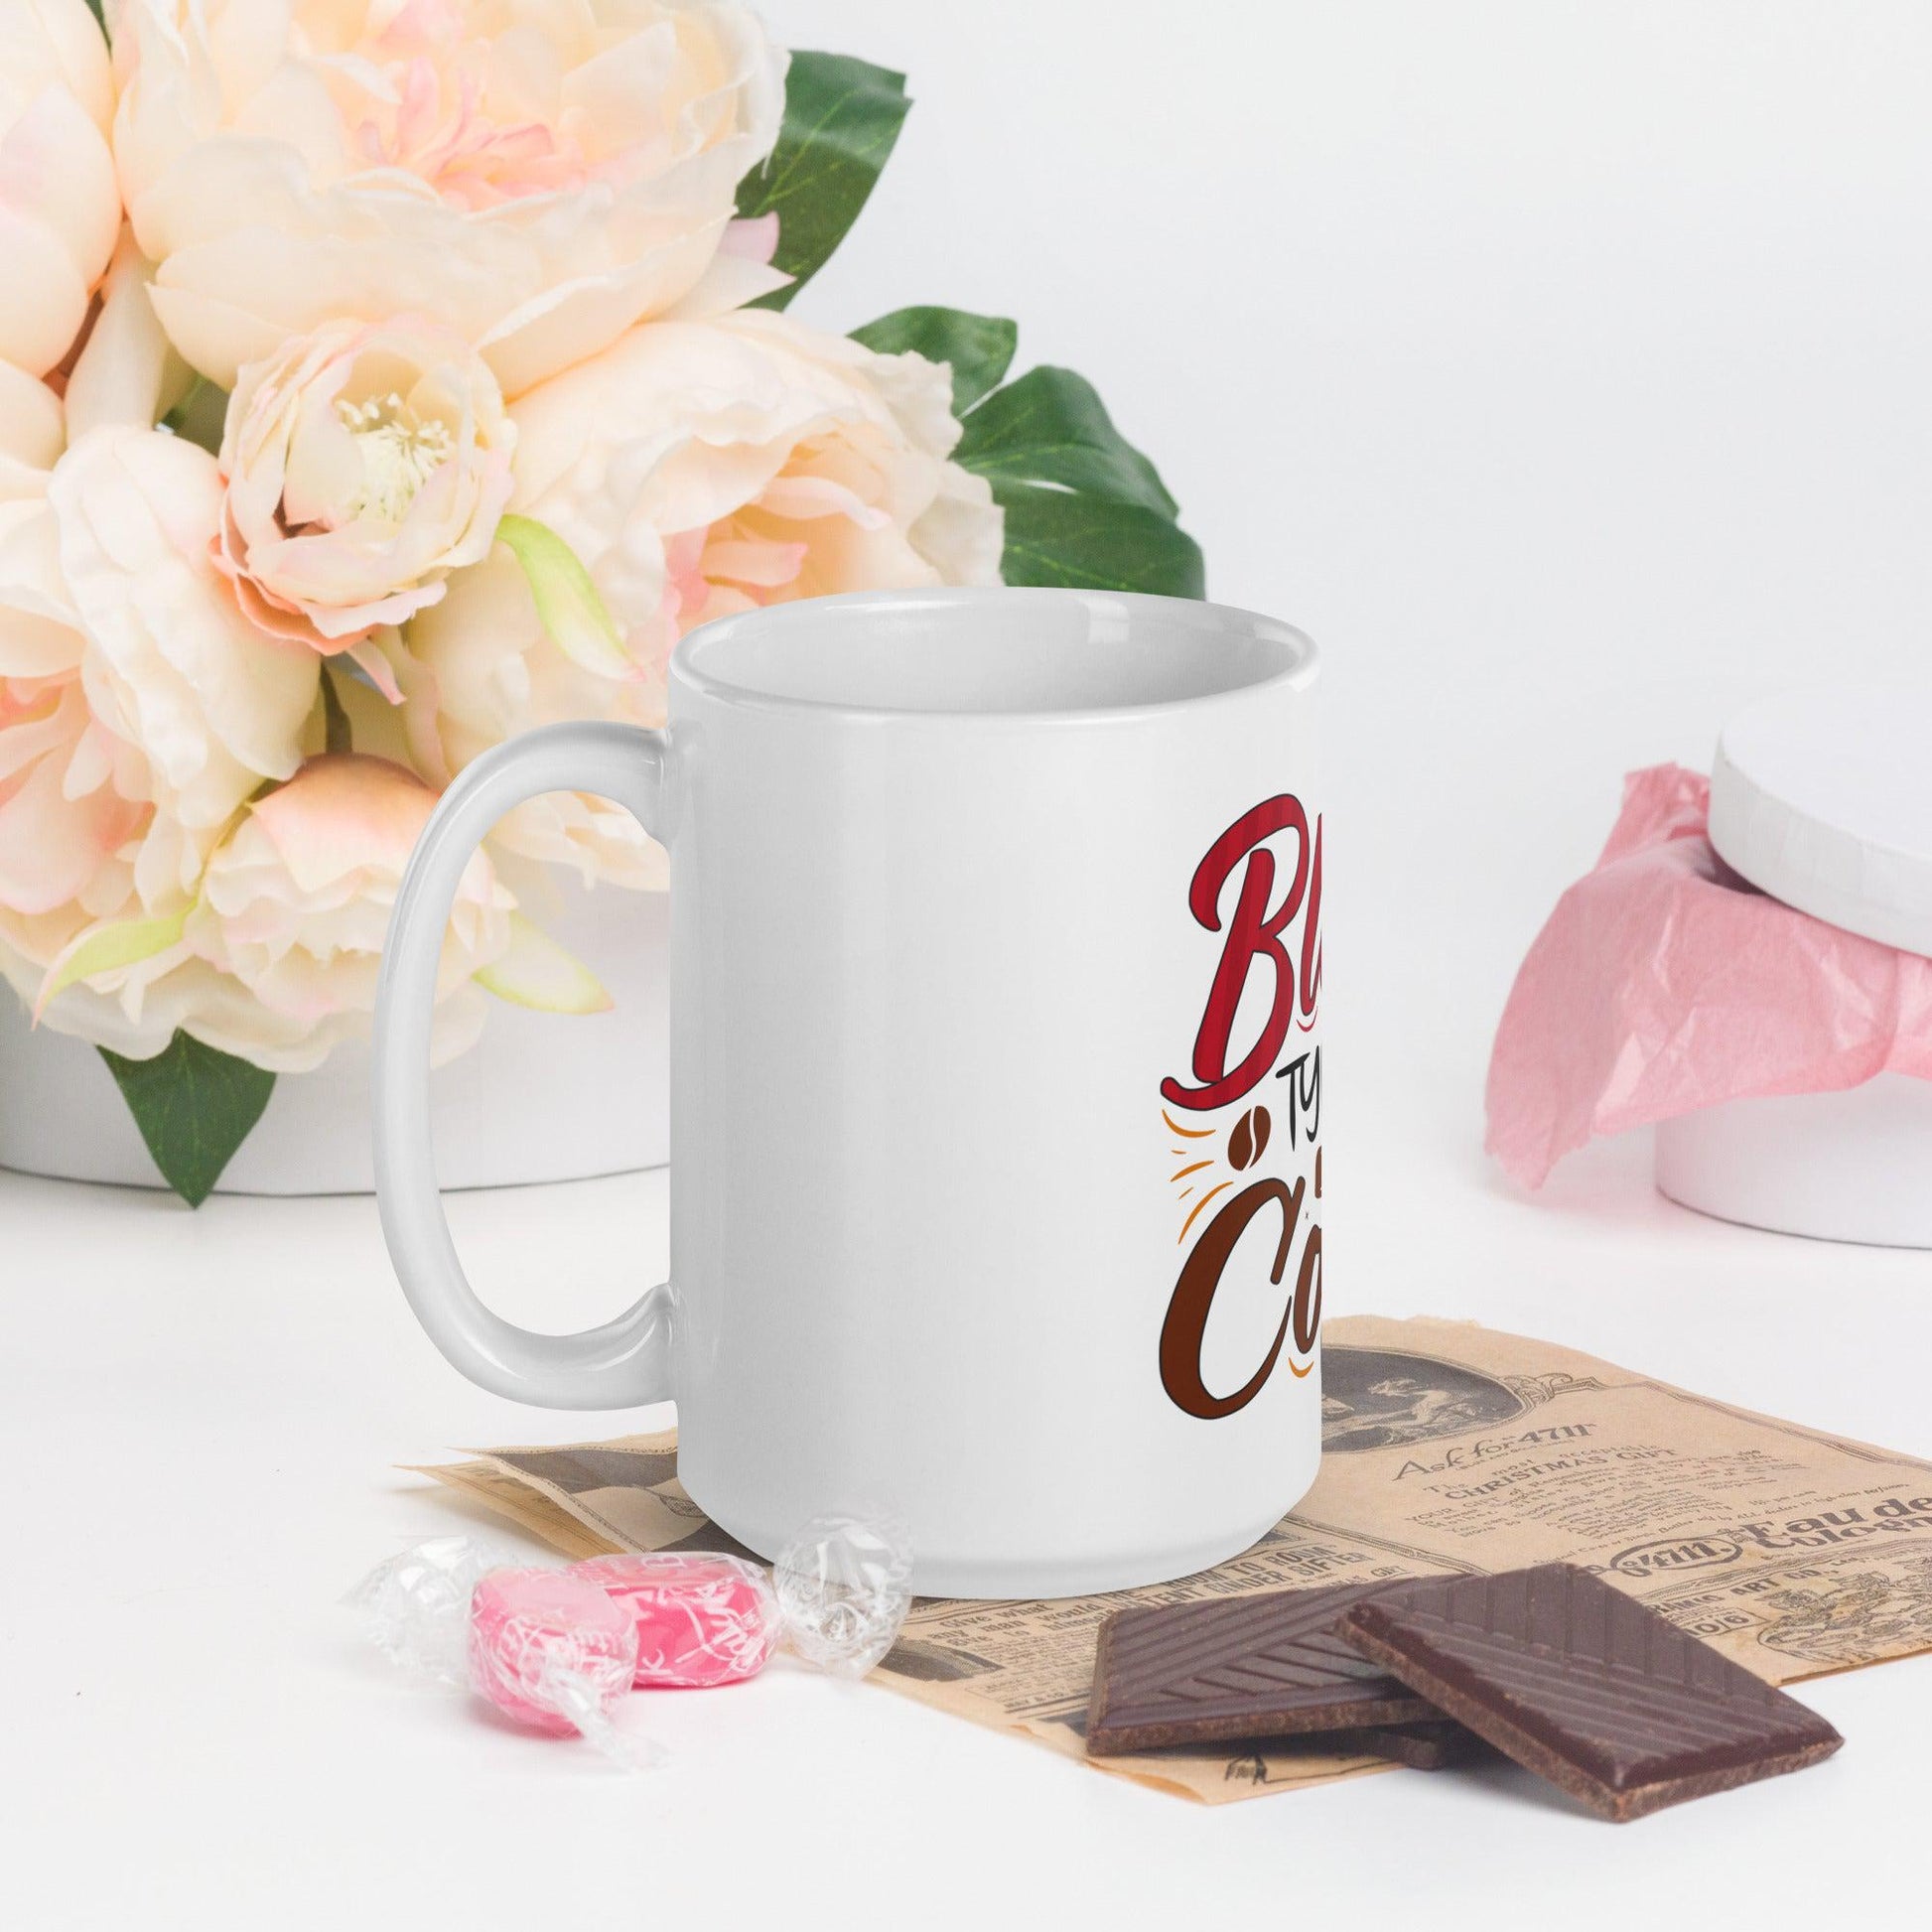 Sip, Smile, Repeat: Unveil the Humor with Our White Glossy Mug - 'My Blood Type is Coffee